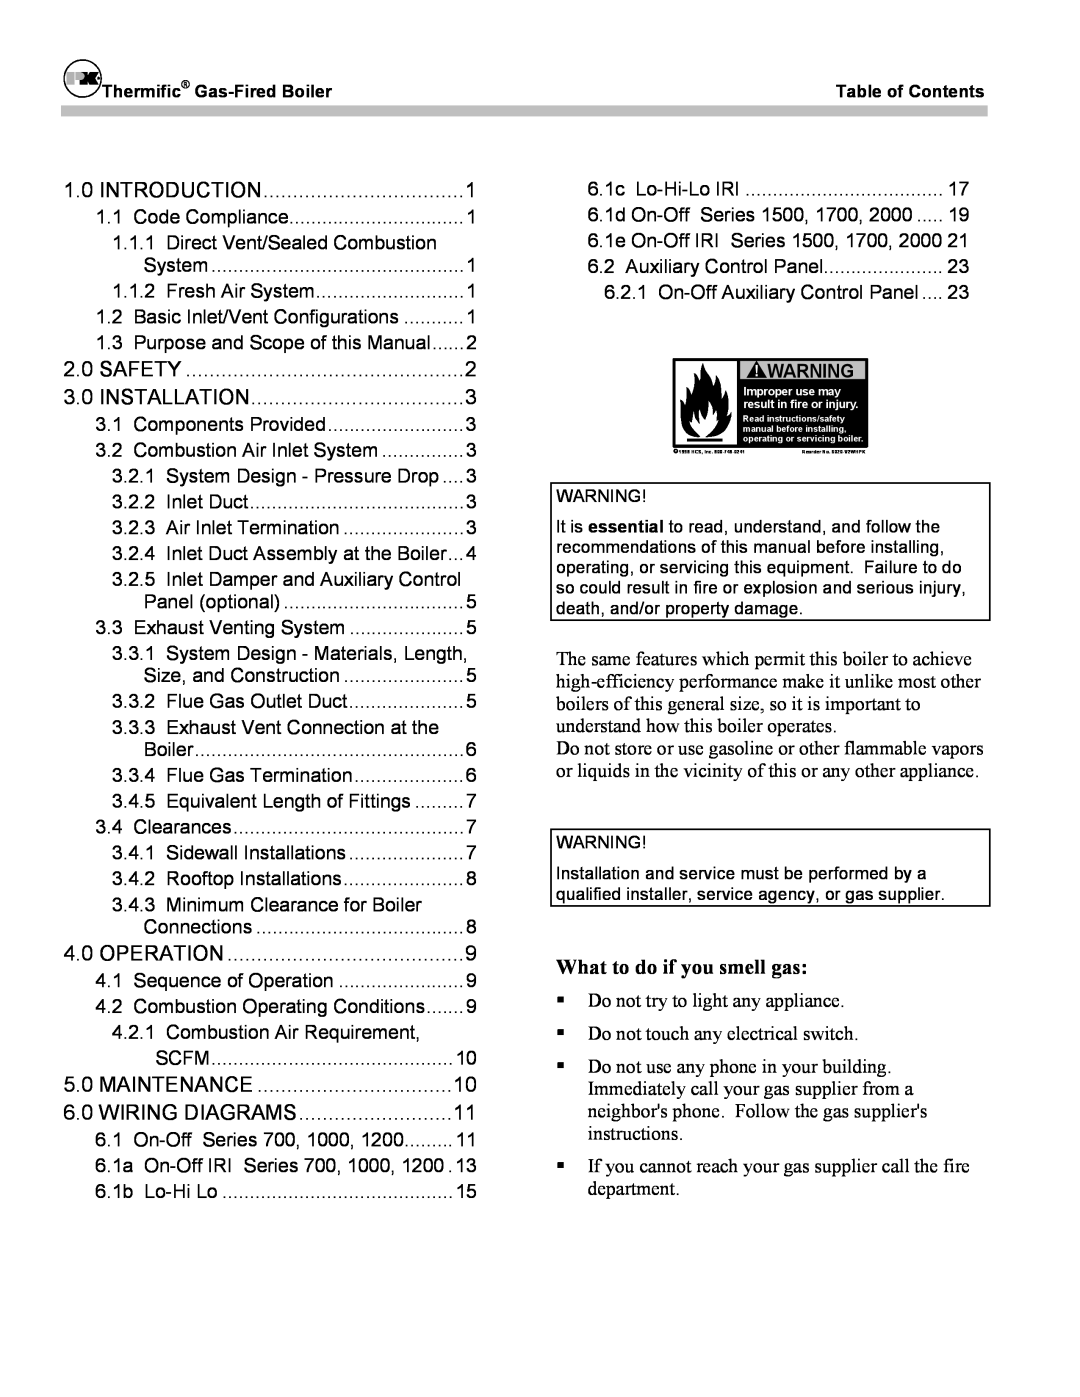 Patterson-Kelley DVSCM-02 owner manual What to do if you smell gas 